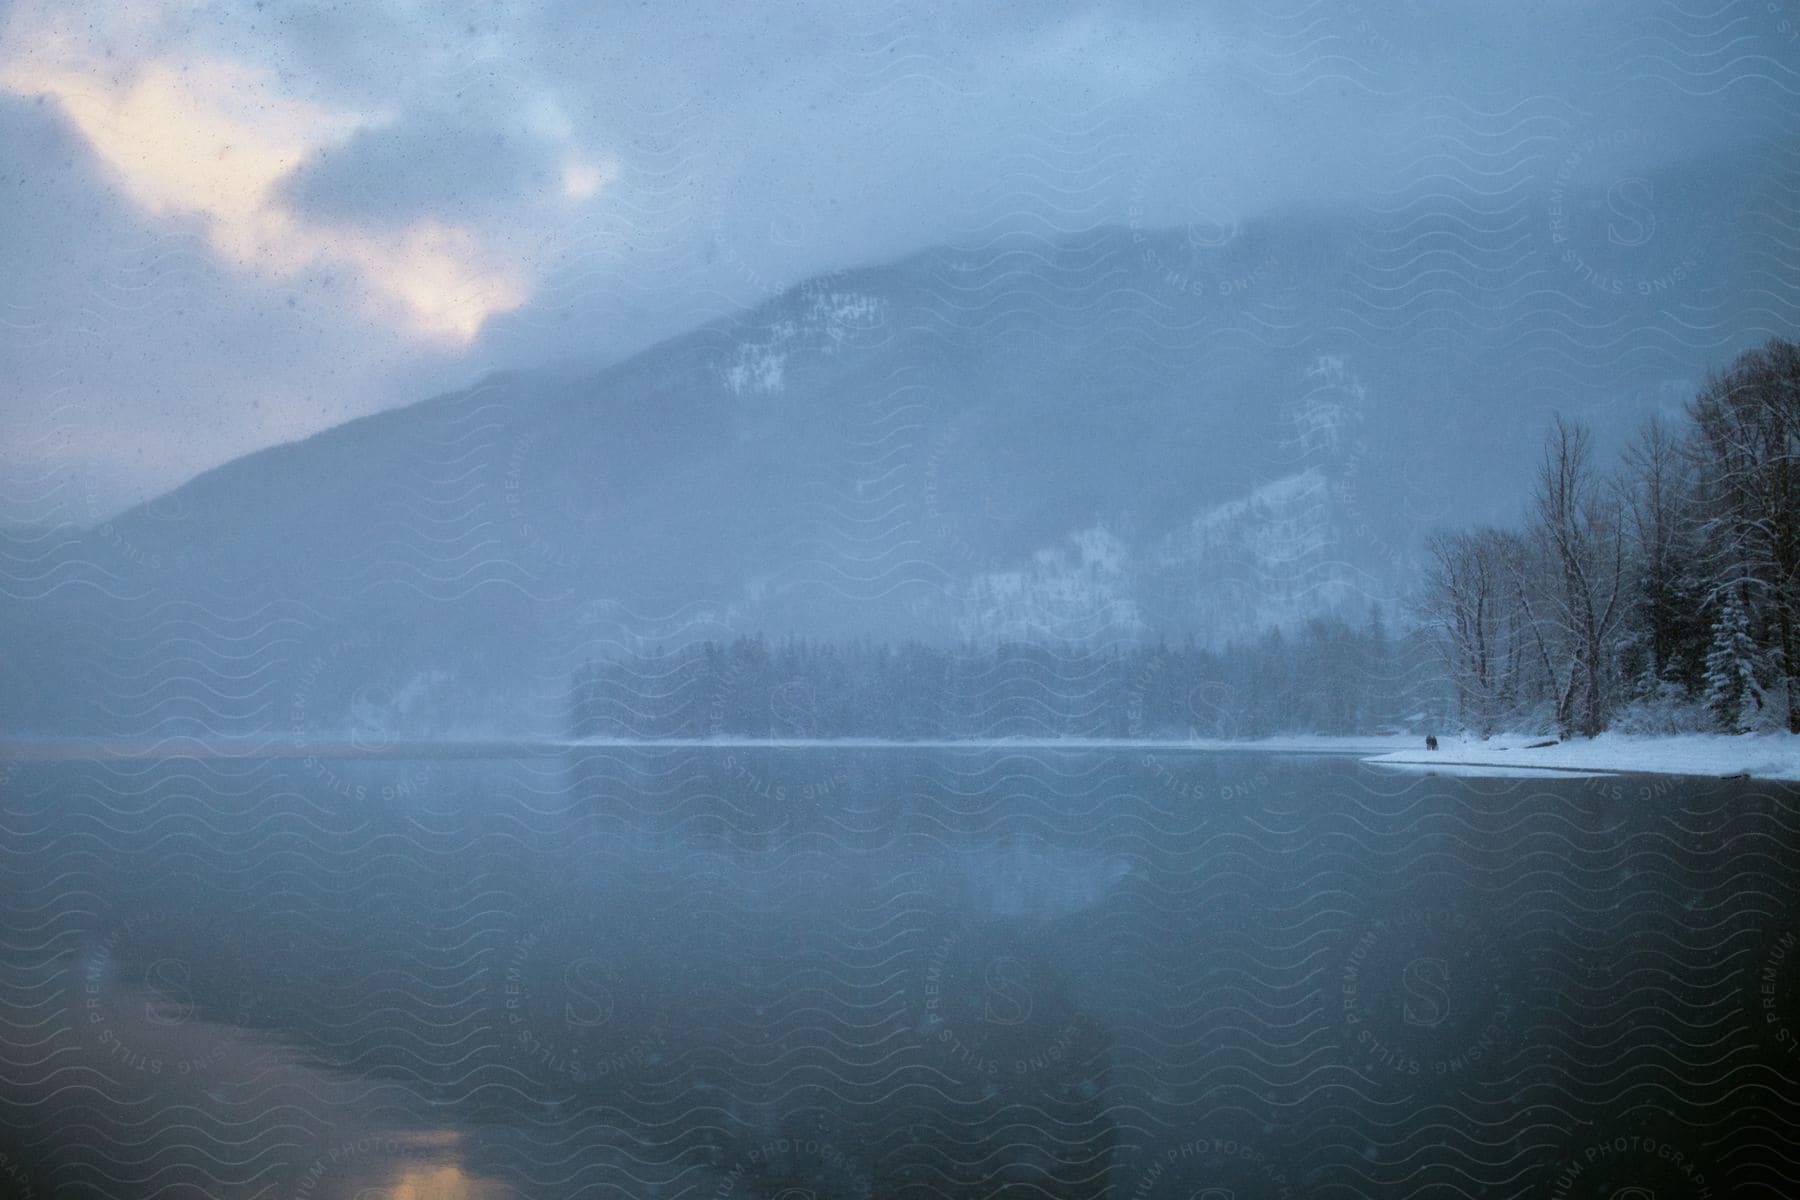 Trees grow along the snow covered coast as forested mountains reflect on the icy water under a foggy cloudy sky